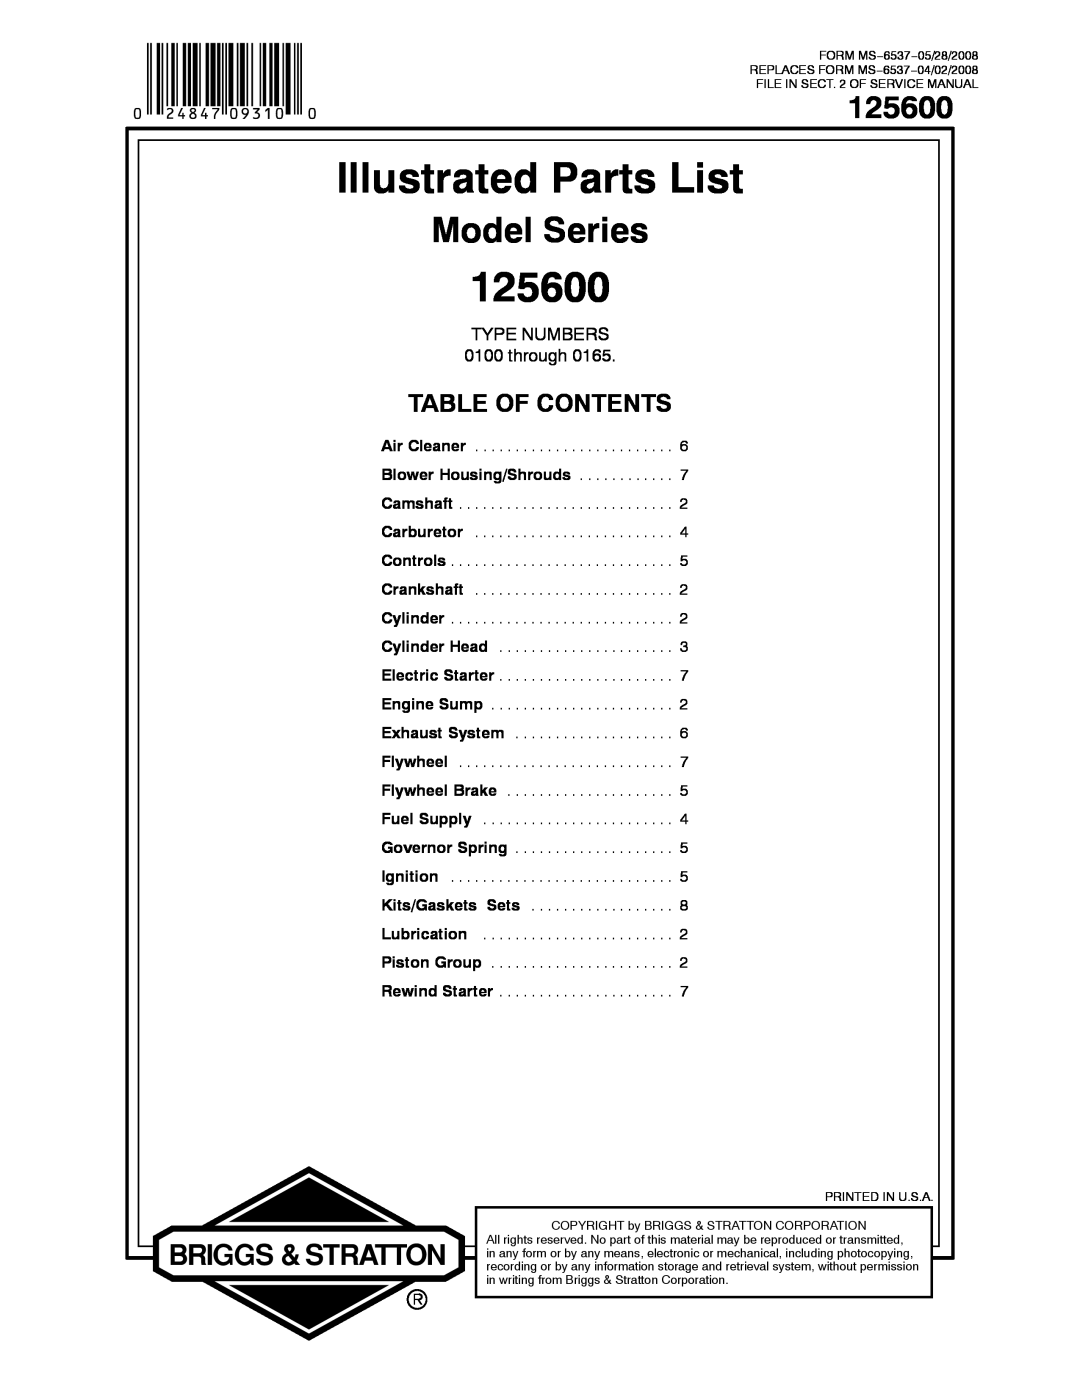 Briggs & Stratton 125600 service manual Illustrated Parts List, Model Series, Table Of Contents, TYPE NUMBERS 0100 through 